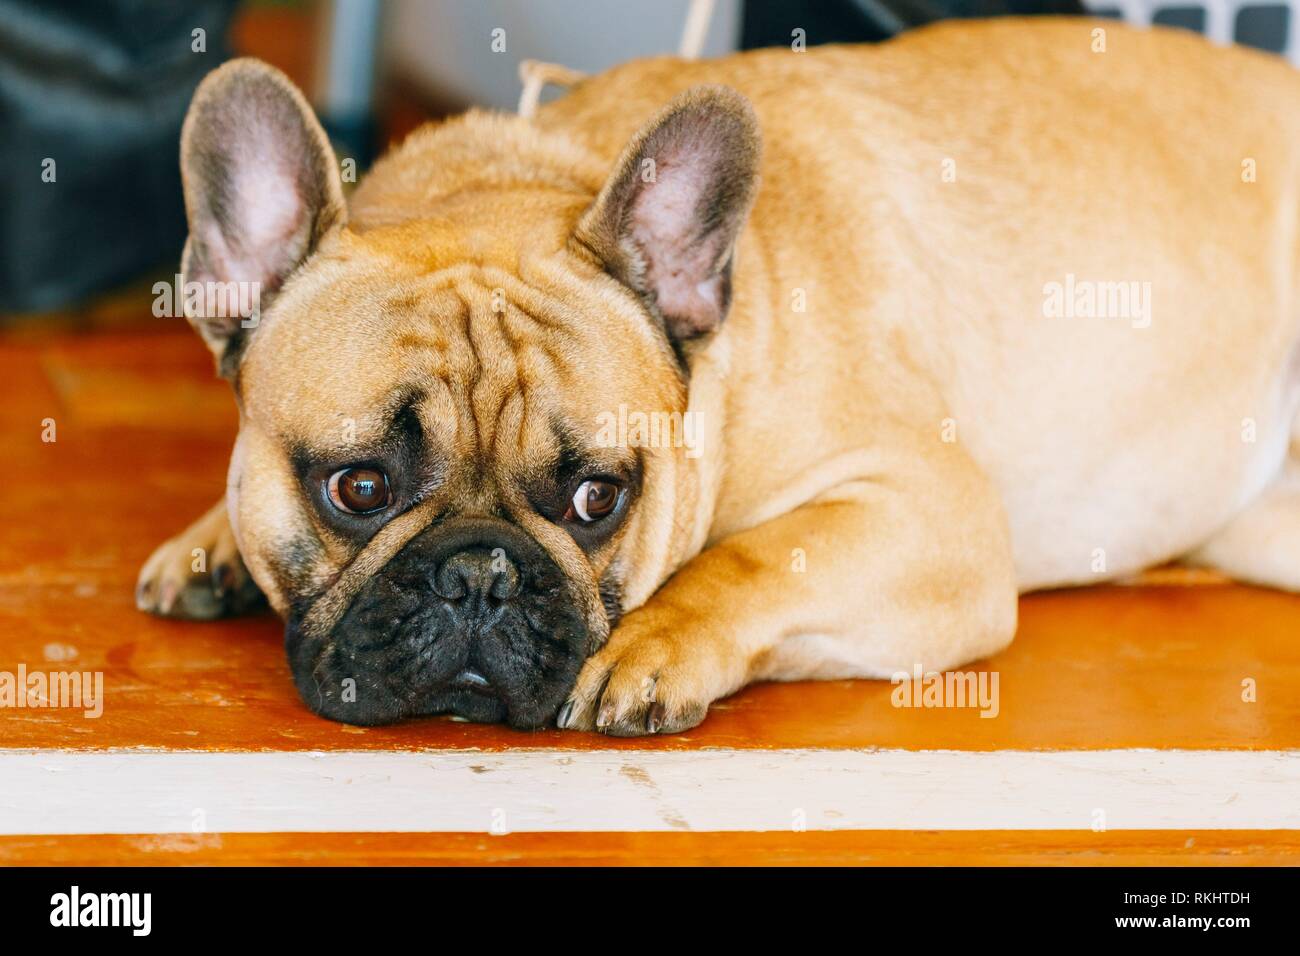 Sad Dog French Bulldog sitting on floor inddor. The French Bulldog is a small breed of domestic dog. Stock Photo